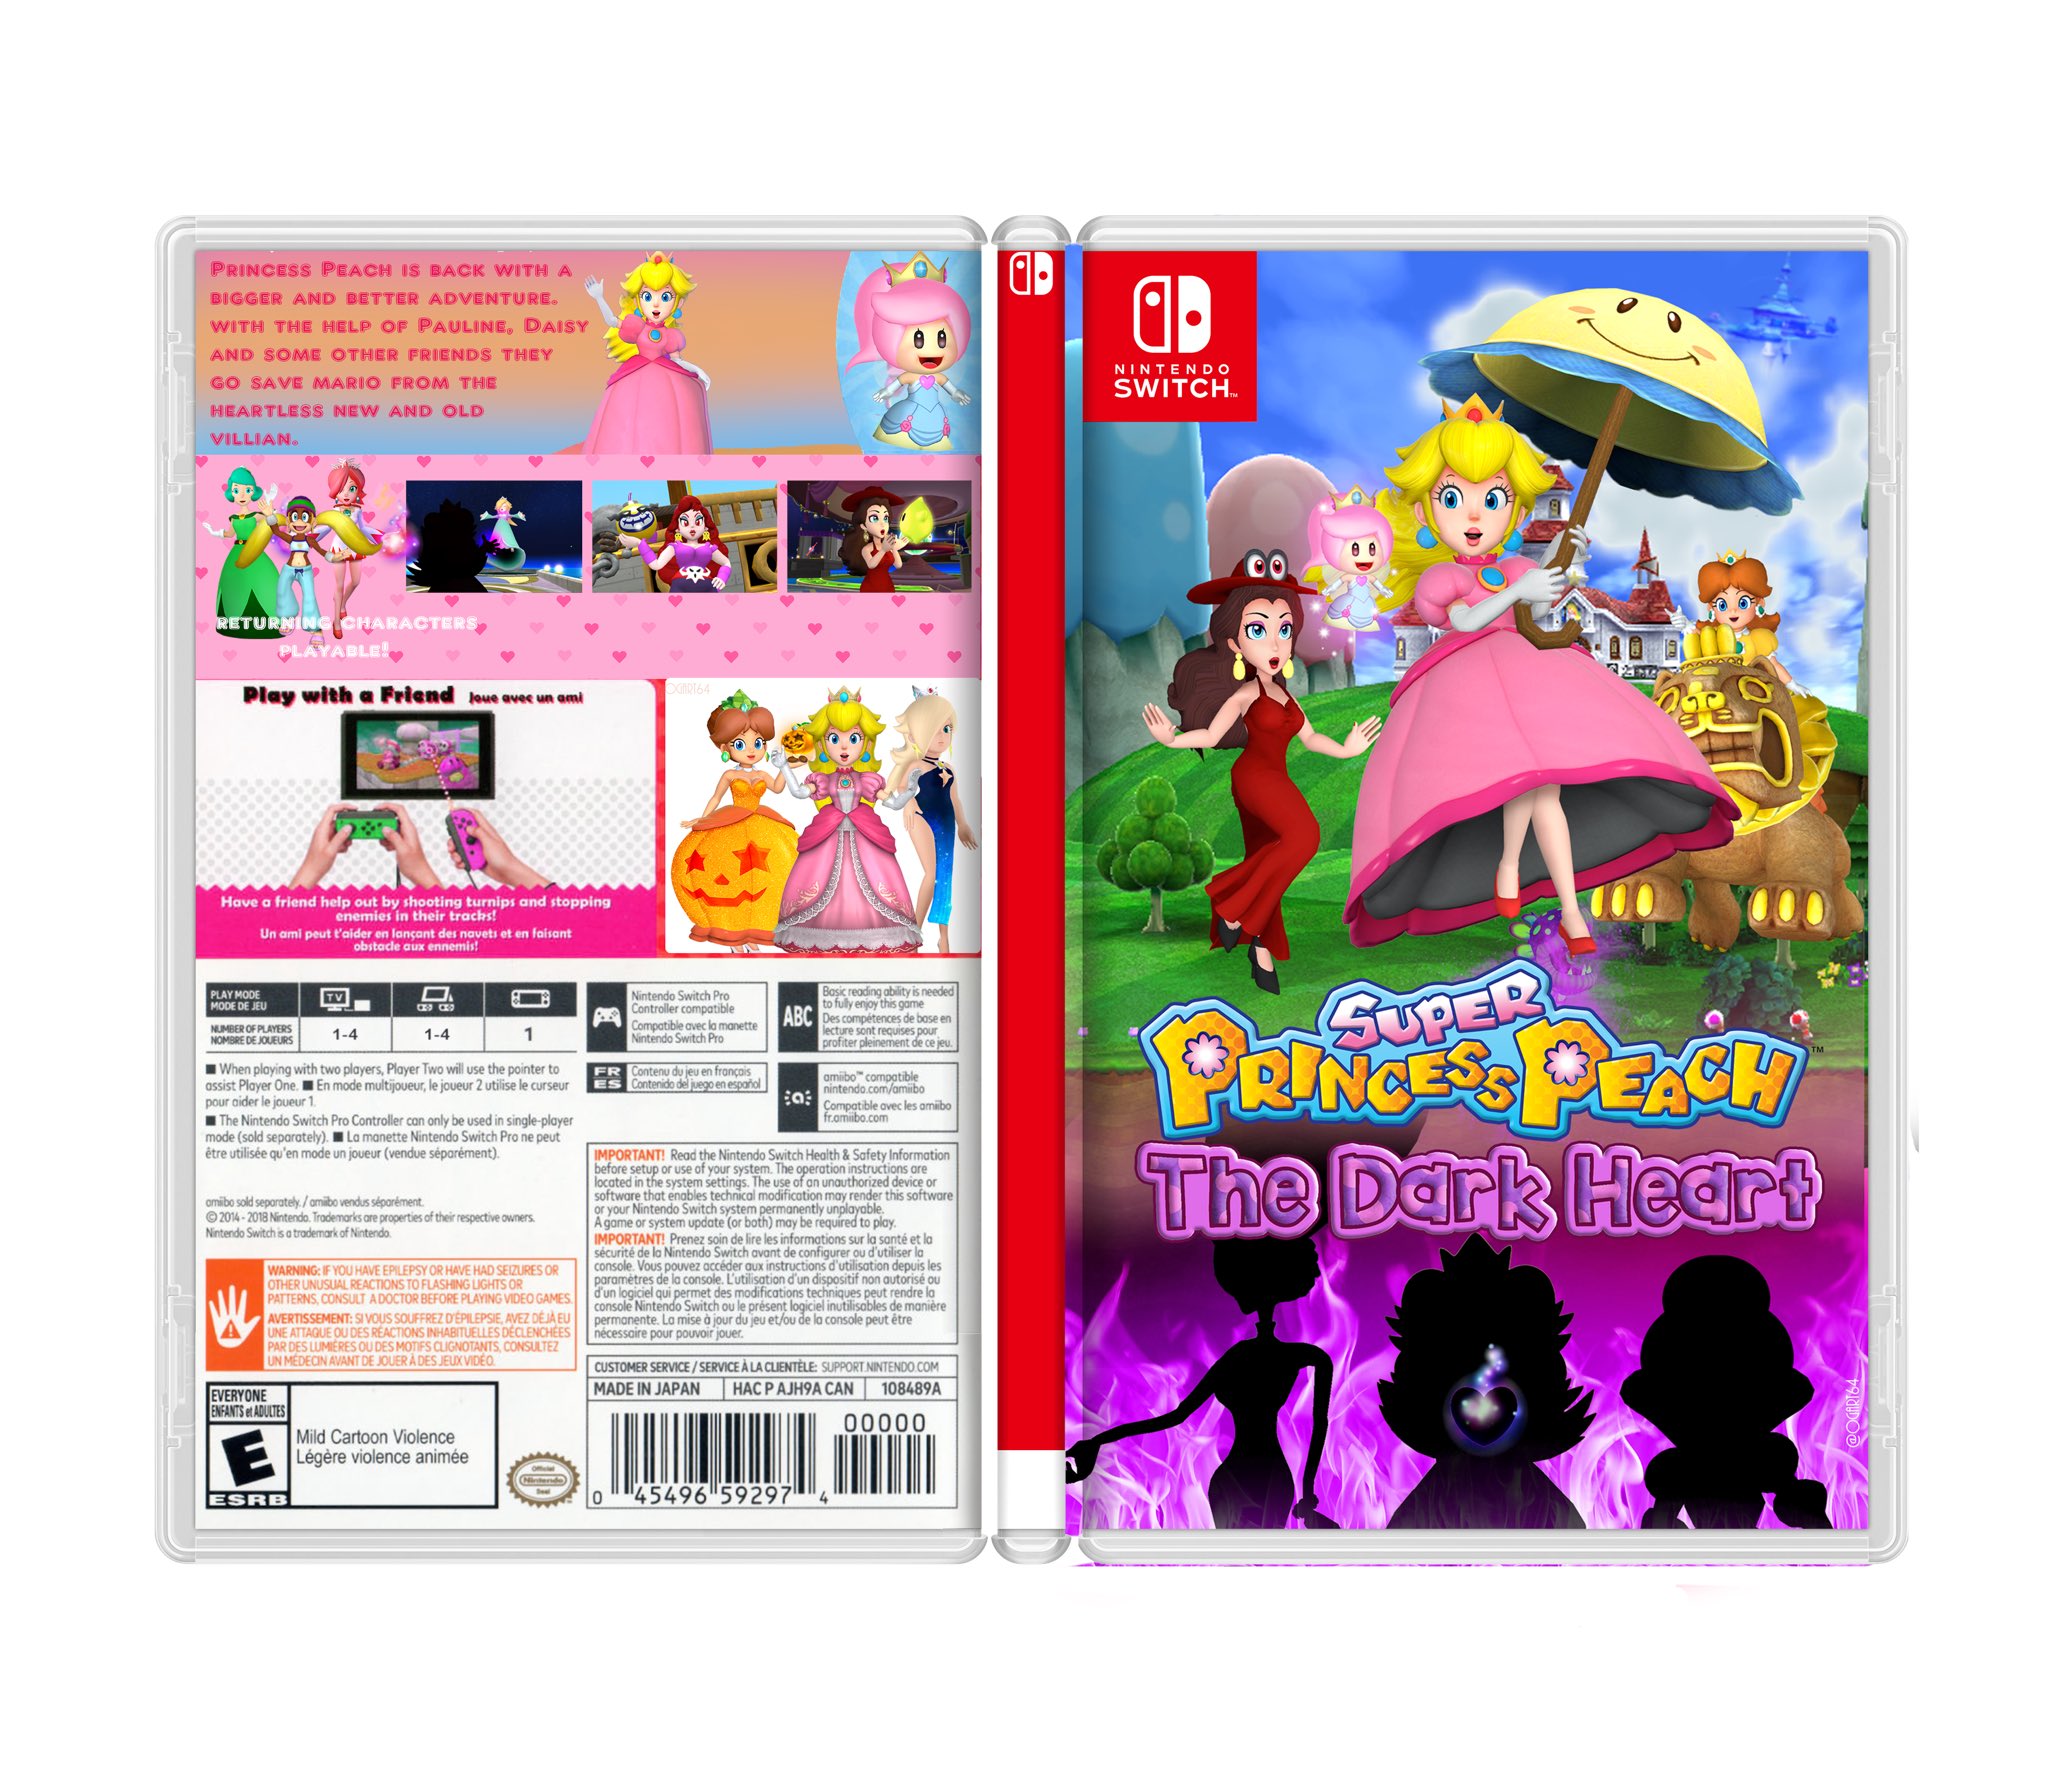 OGART64 on X: I'm sorry for who fell for my fake Super Princess Peach 2  leak. I didn't think it would be believed. I wish there was a sequel thoe.  #Nintendo  /